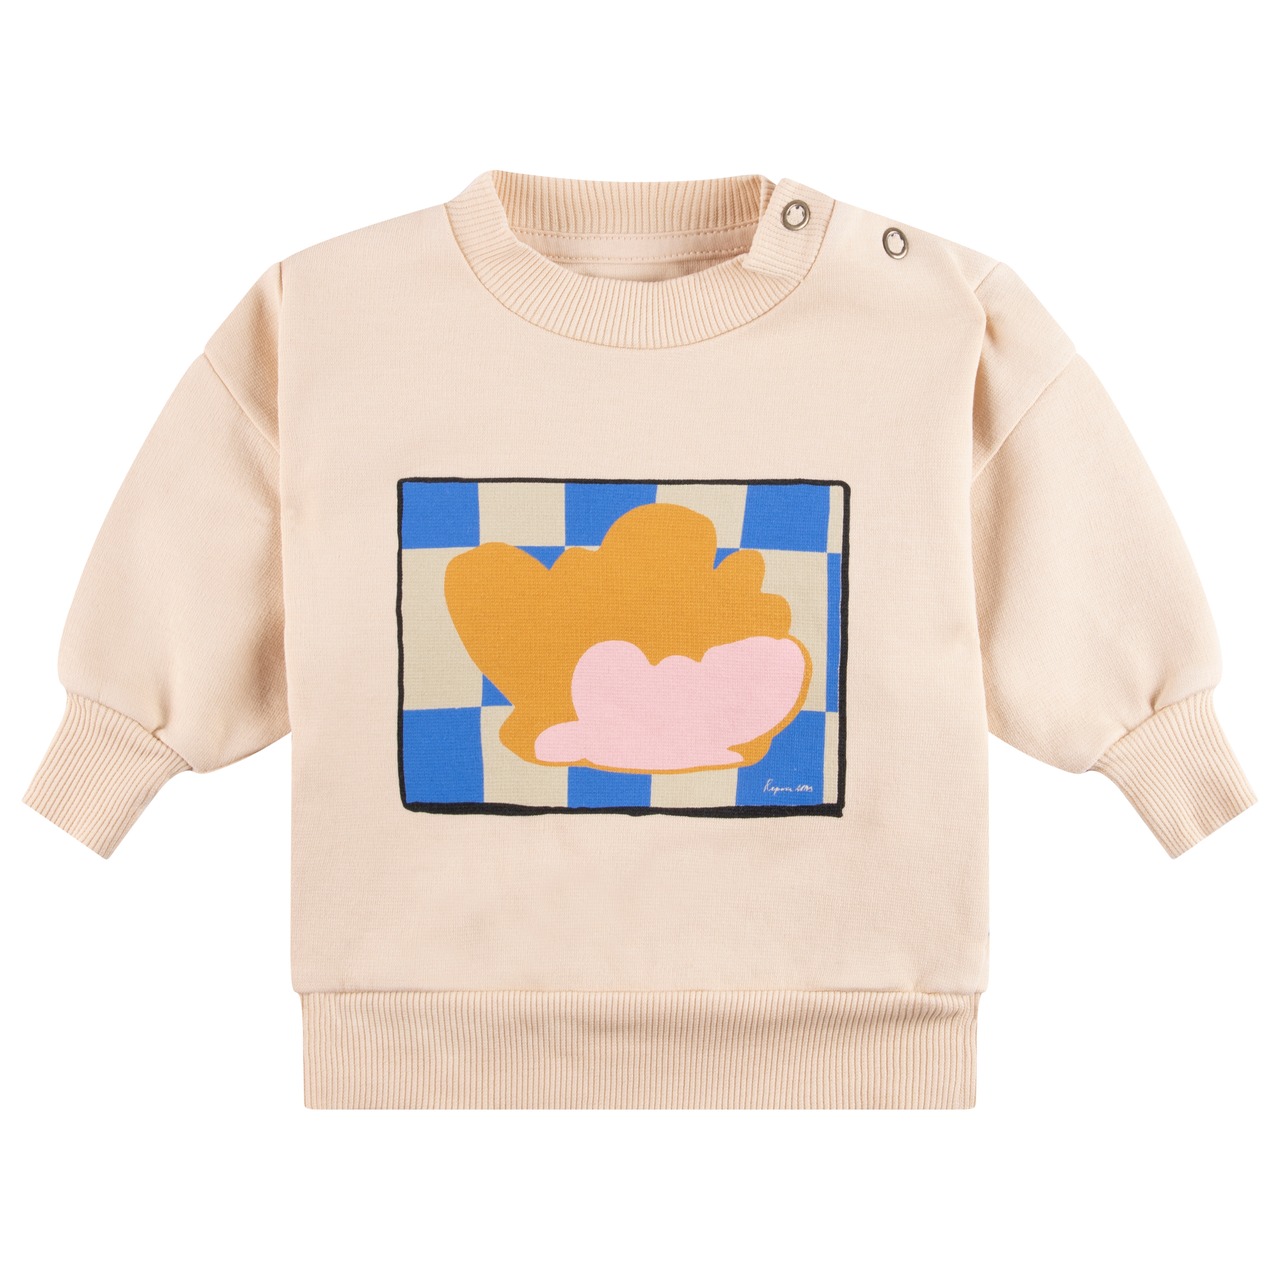 〈 REPOSE AMS 23AW / BABY 〉crewneck sweater / warm oyster